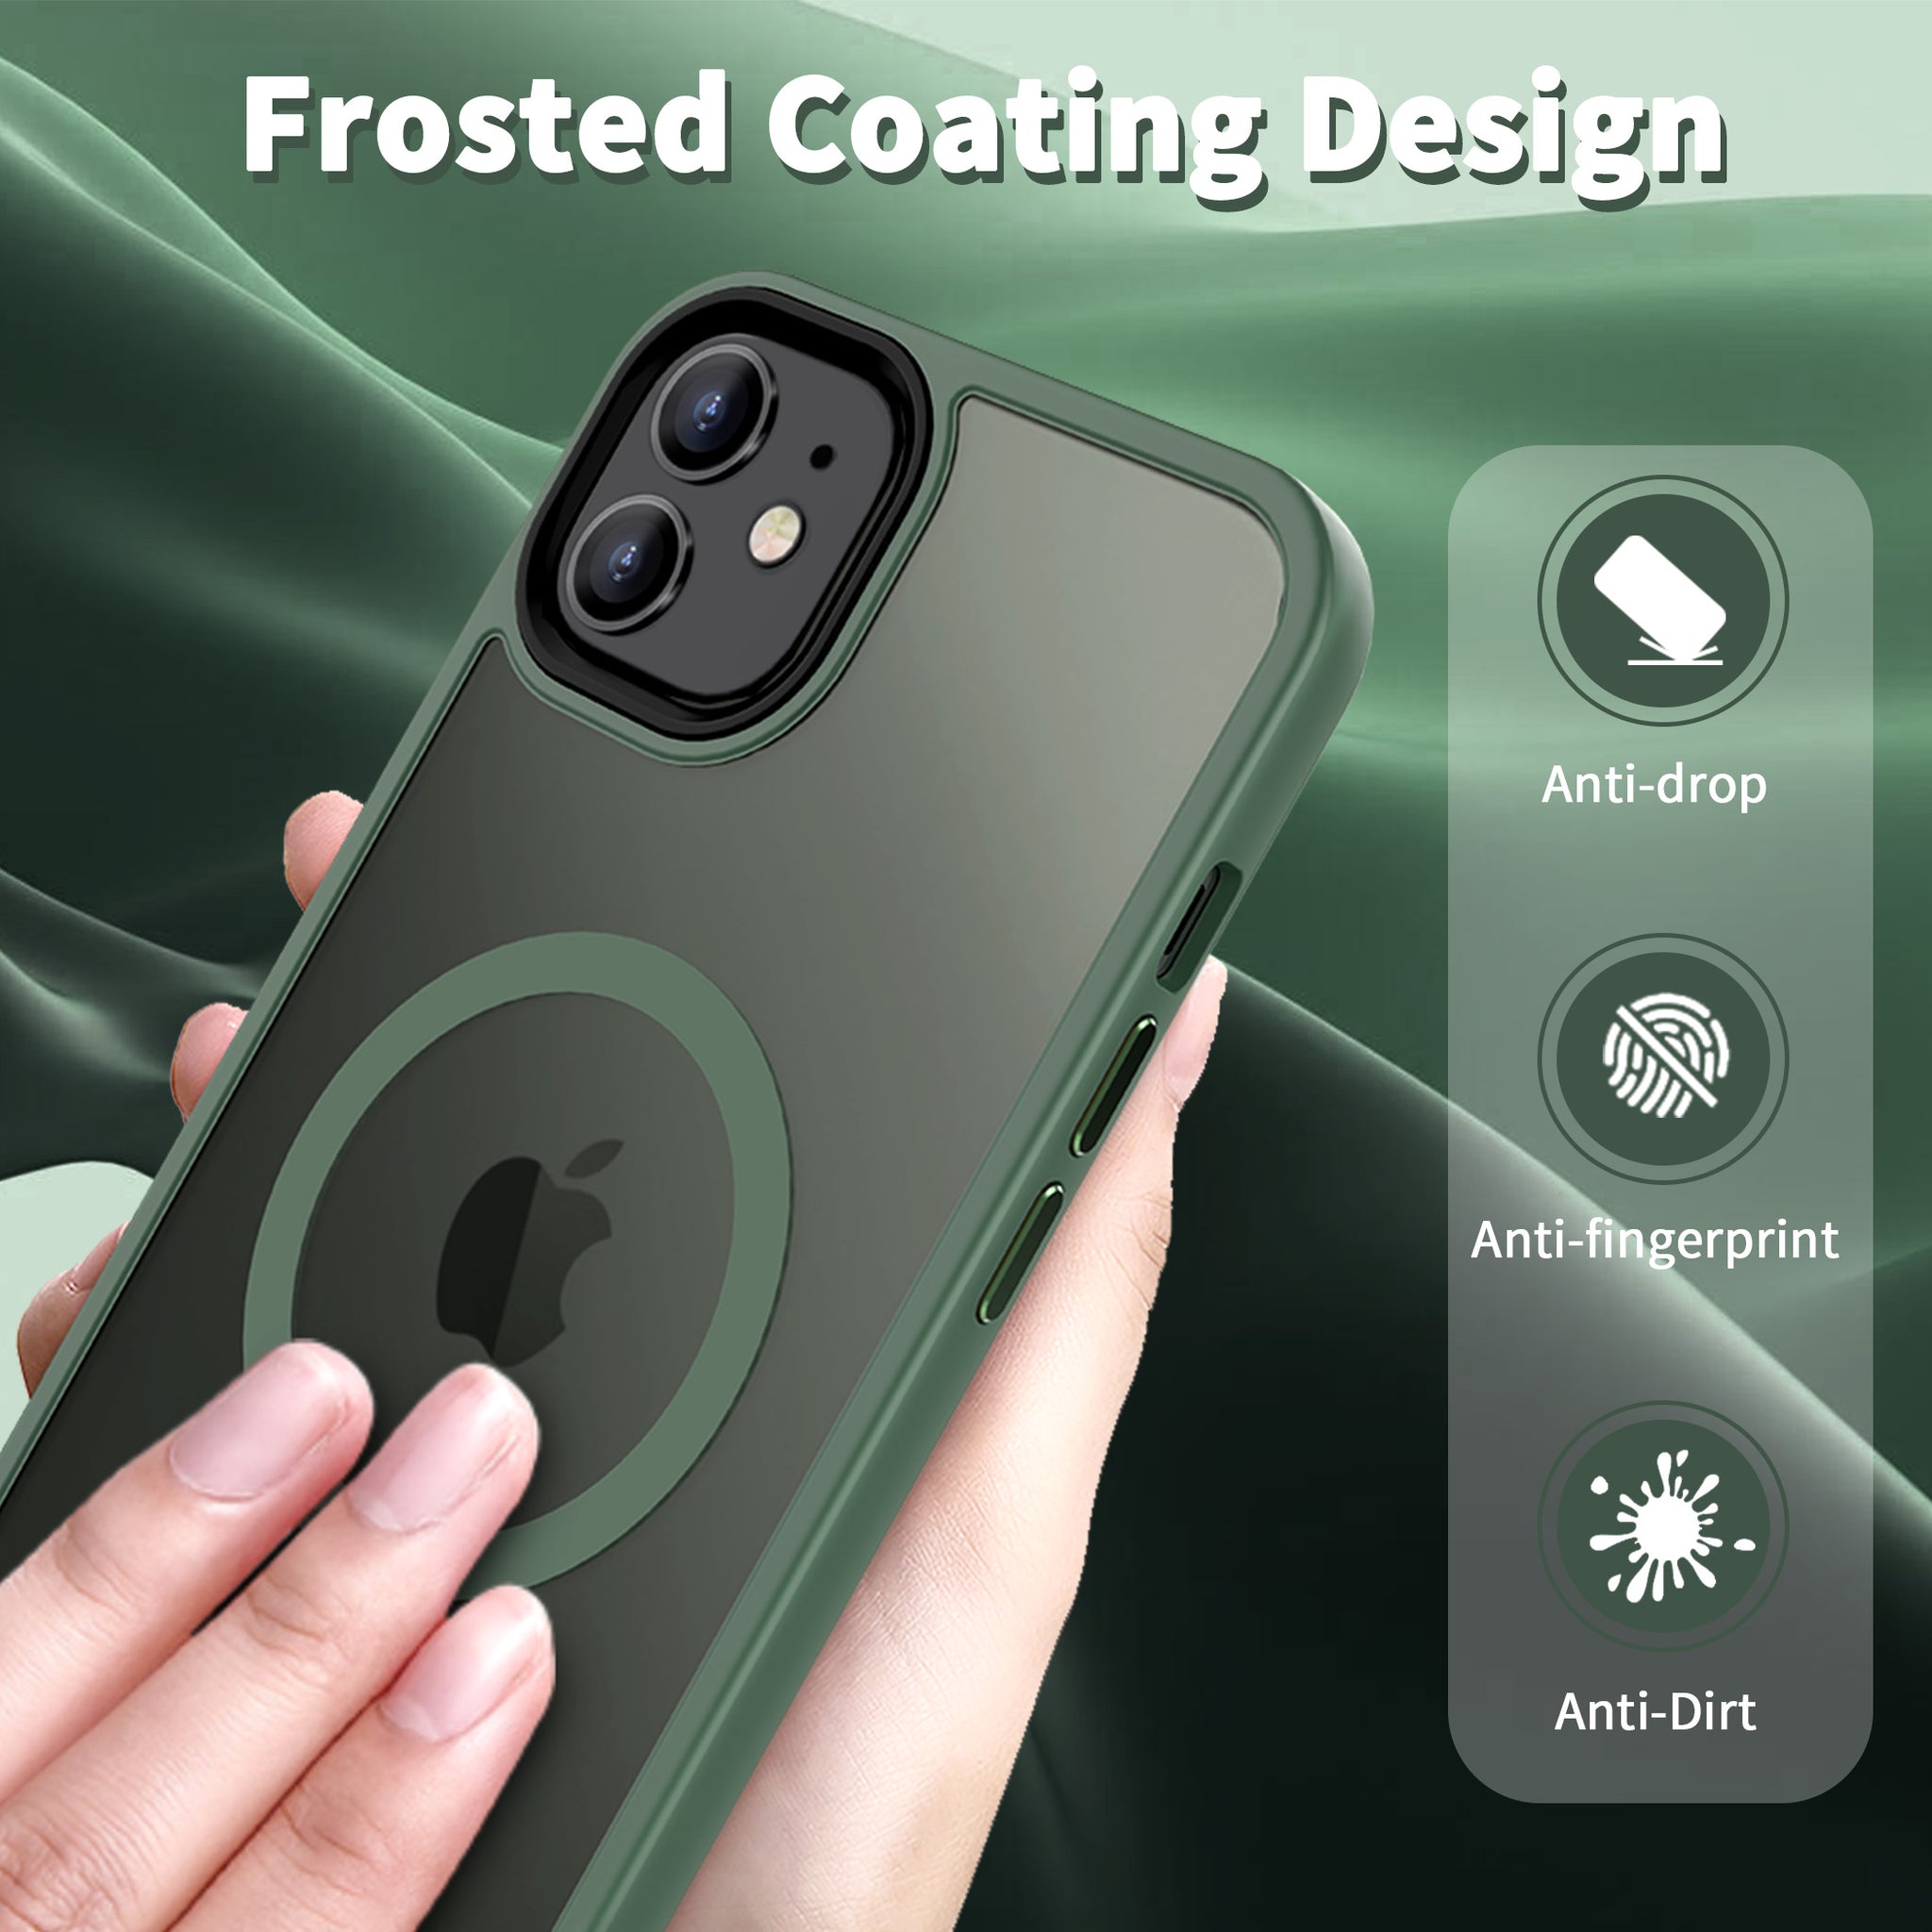 CACOE Magnetic Case for iPhone 12 & iPhone 12 Pro 2020 6.1 inch-Compatible with MagSafe & Magnetic Car Phone Mount,Anti-Fingerprint TPU Thin Phone Cases Cover Protective Shockproof (Dark Green)